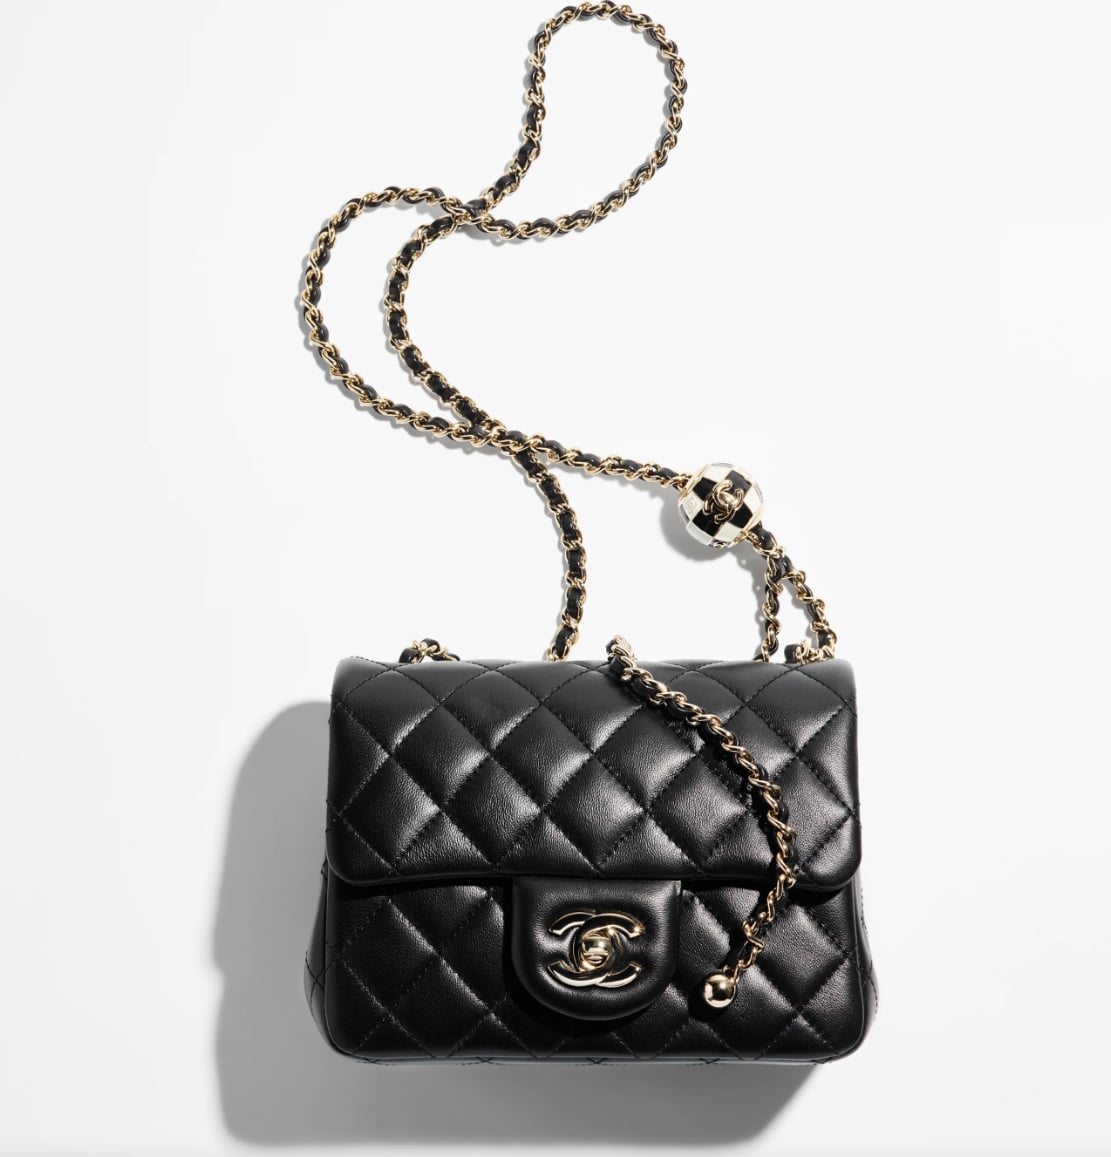 How The Scandi Set Styles Classic Chanel Bags  British Vogue